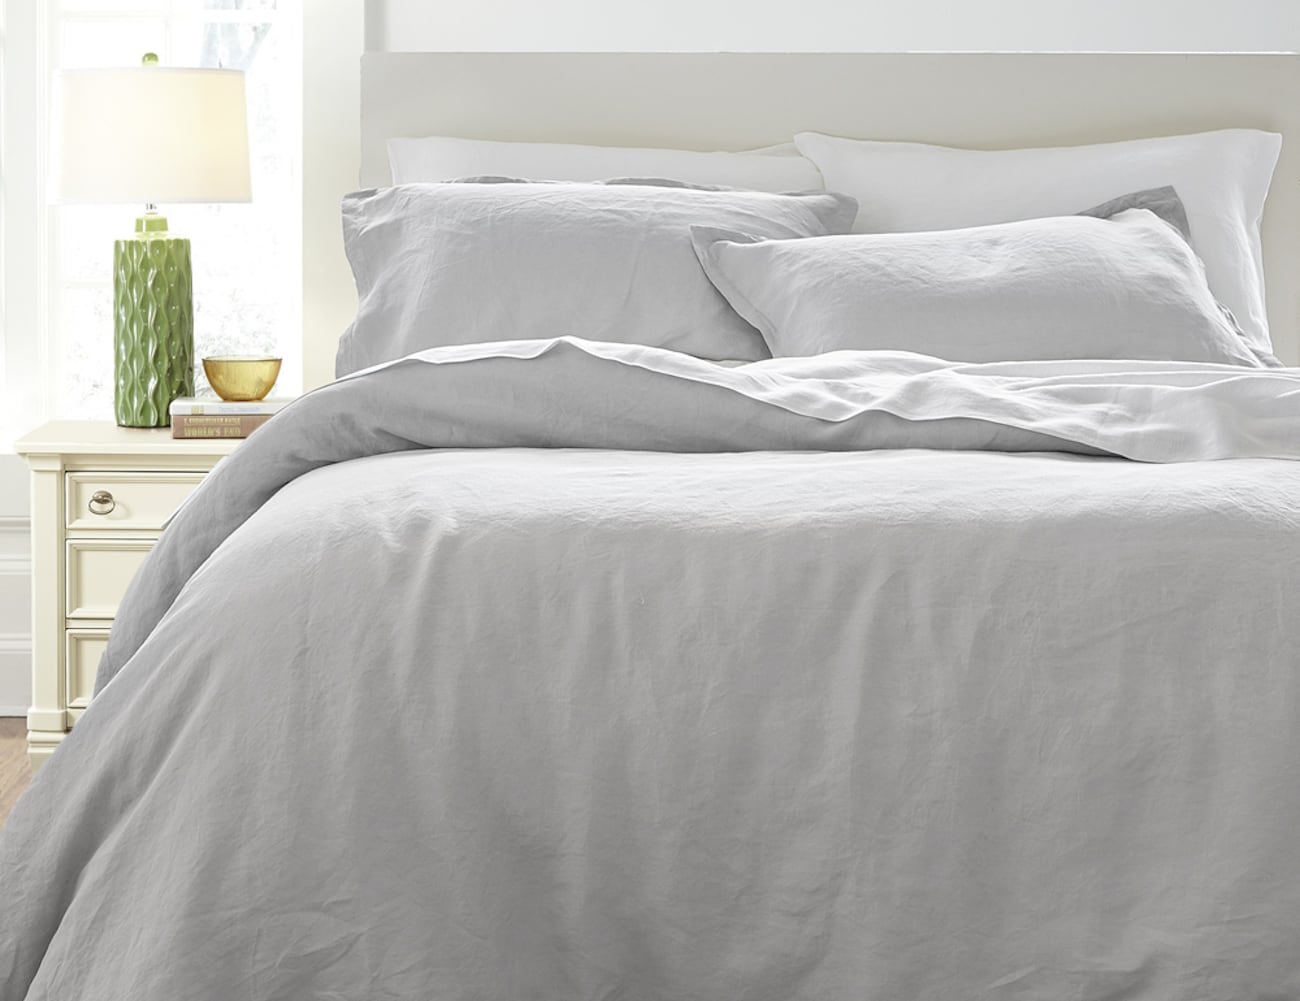 Bamboo Tranquility High-Performance Bedding